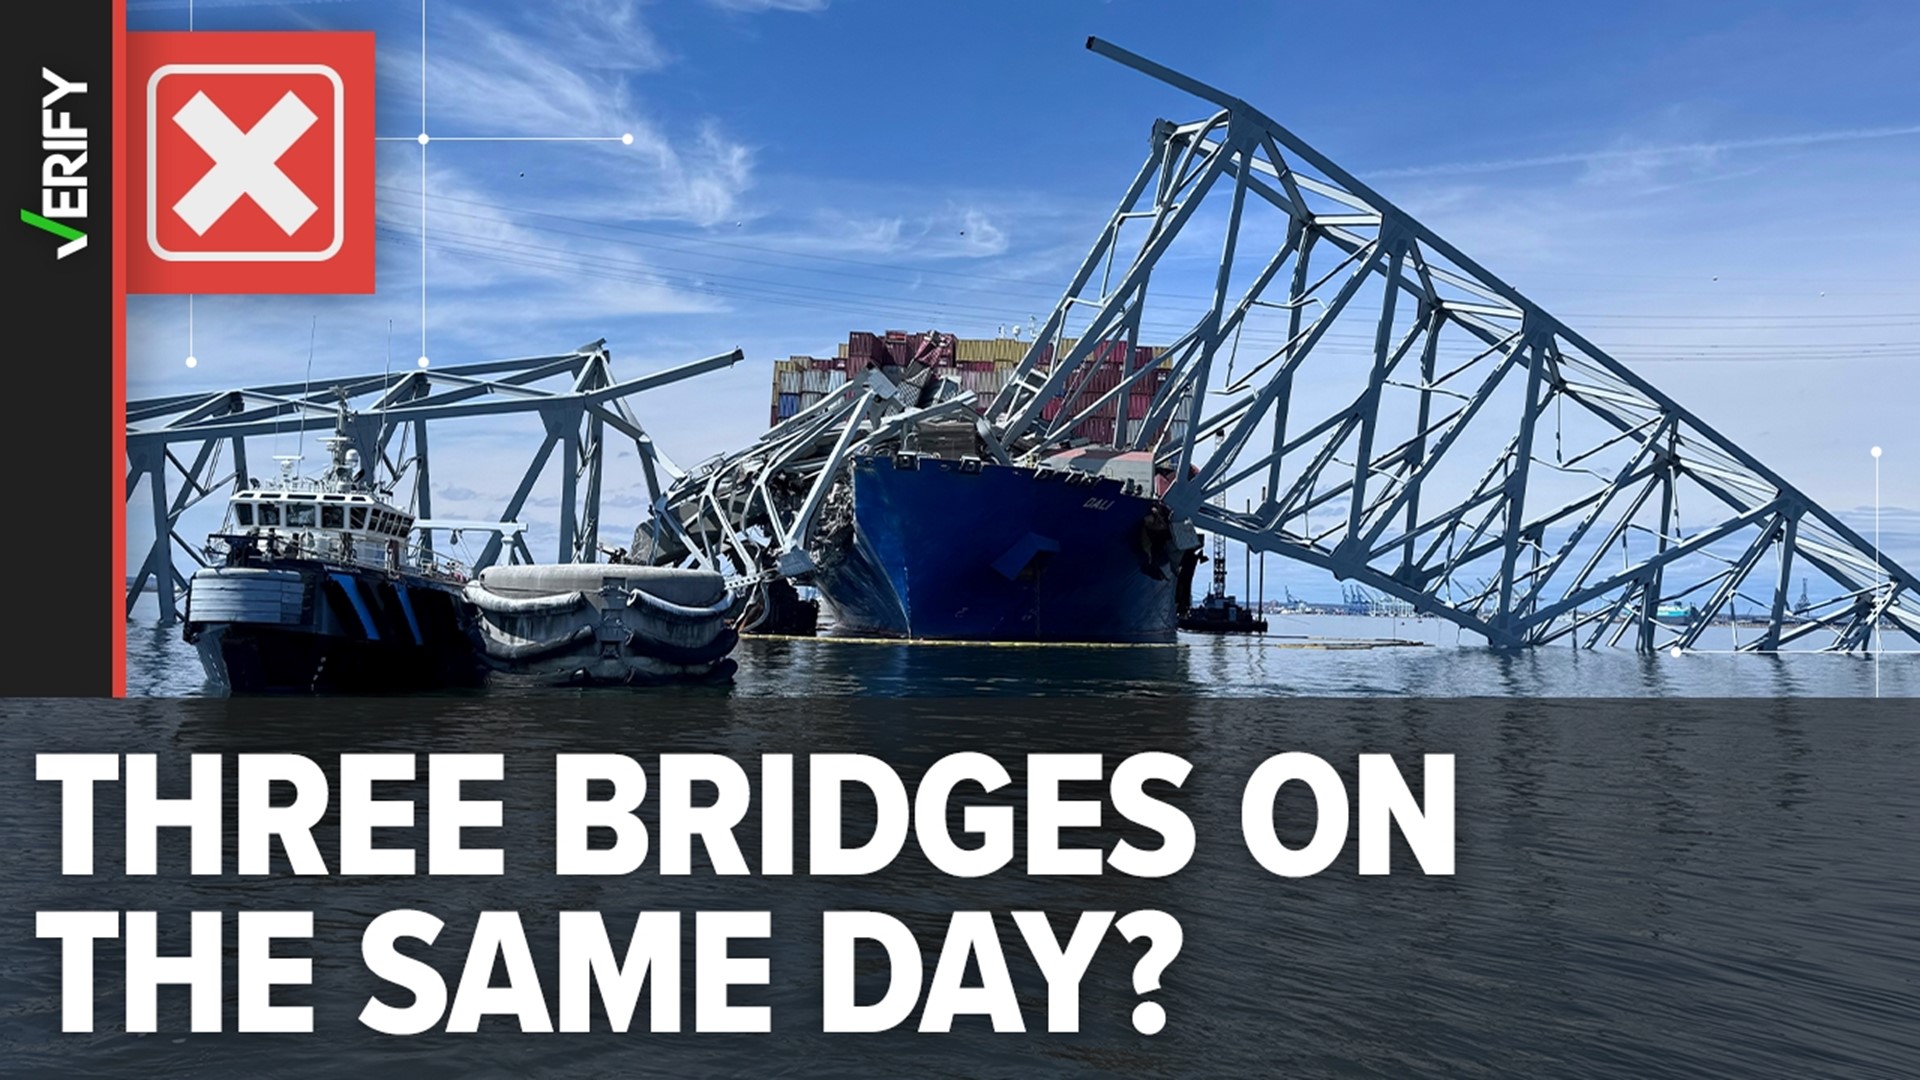 False posts claim bridges in Ohio and Delaware were damaged the same day the Francis Scott Key Bridge collapsed in Baltimore.